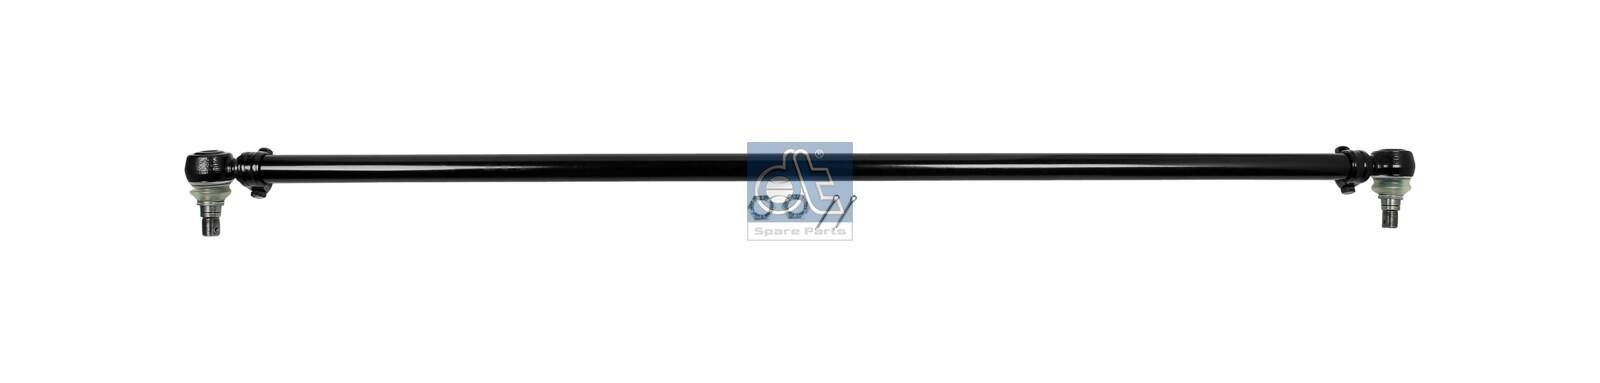 DT Spare Parts 5.22006 Rod Assembly 1700 001